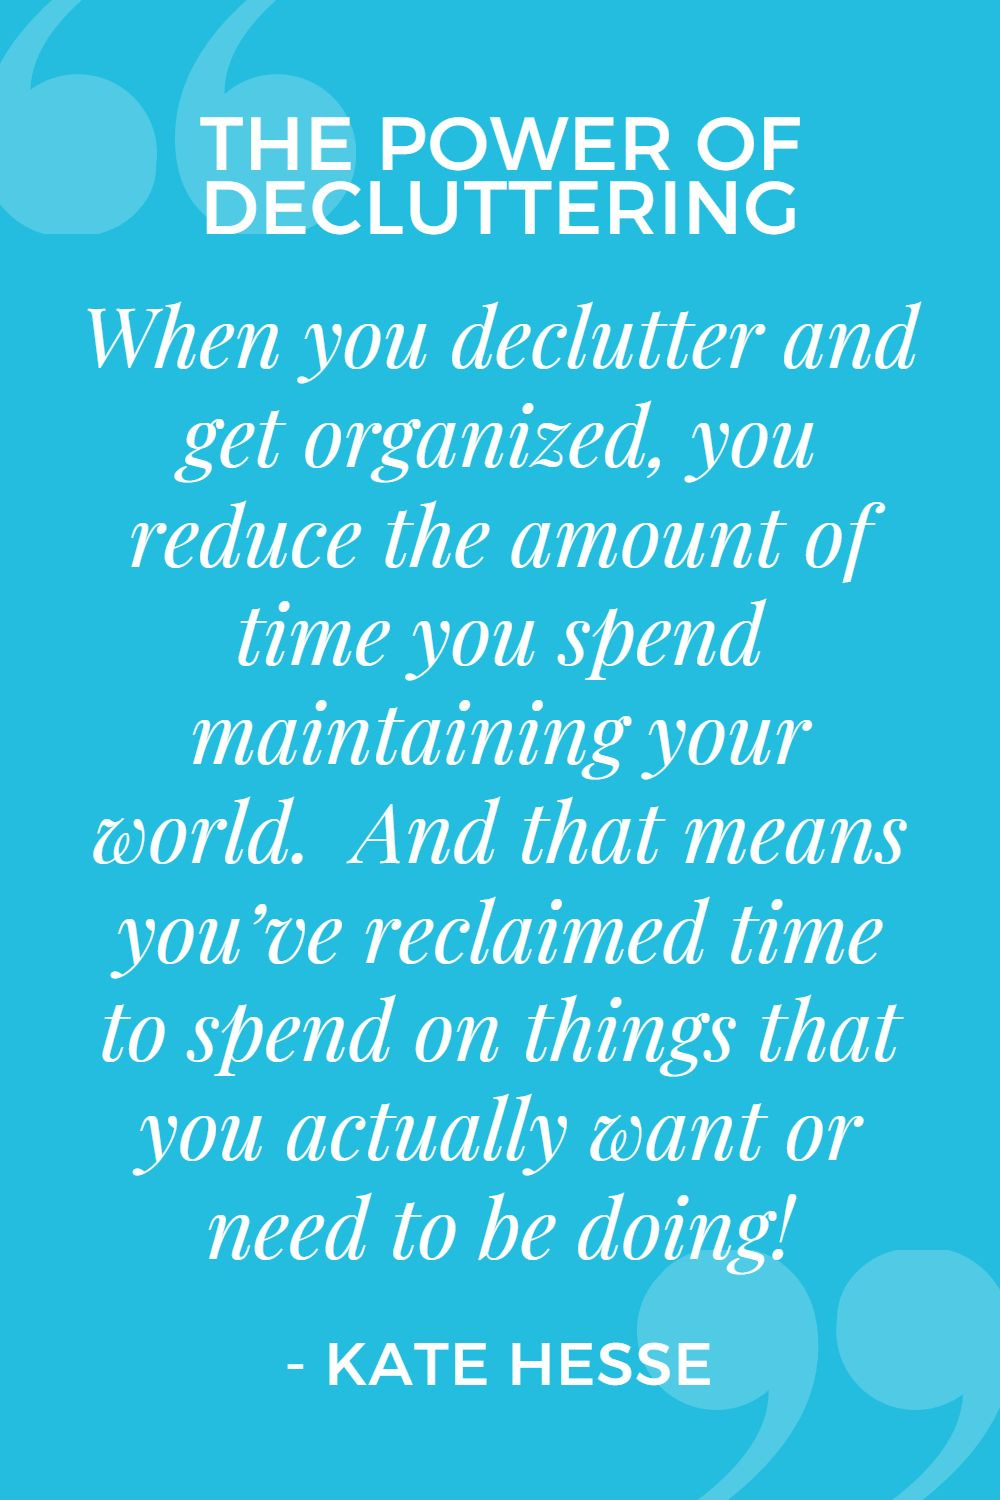 When you declutter and get organized, you reduce the amount of time you spend maintaining your world. And that means you've reclaimed time to spend on things you actually want or need to be doing!